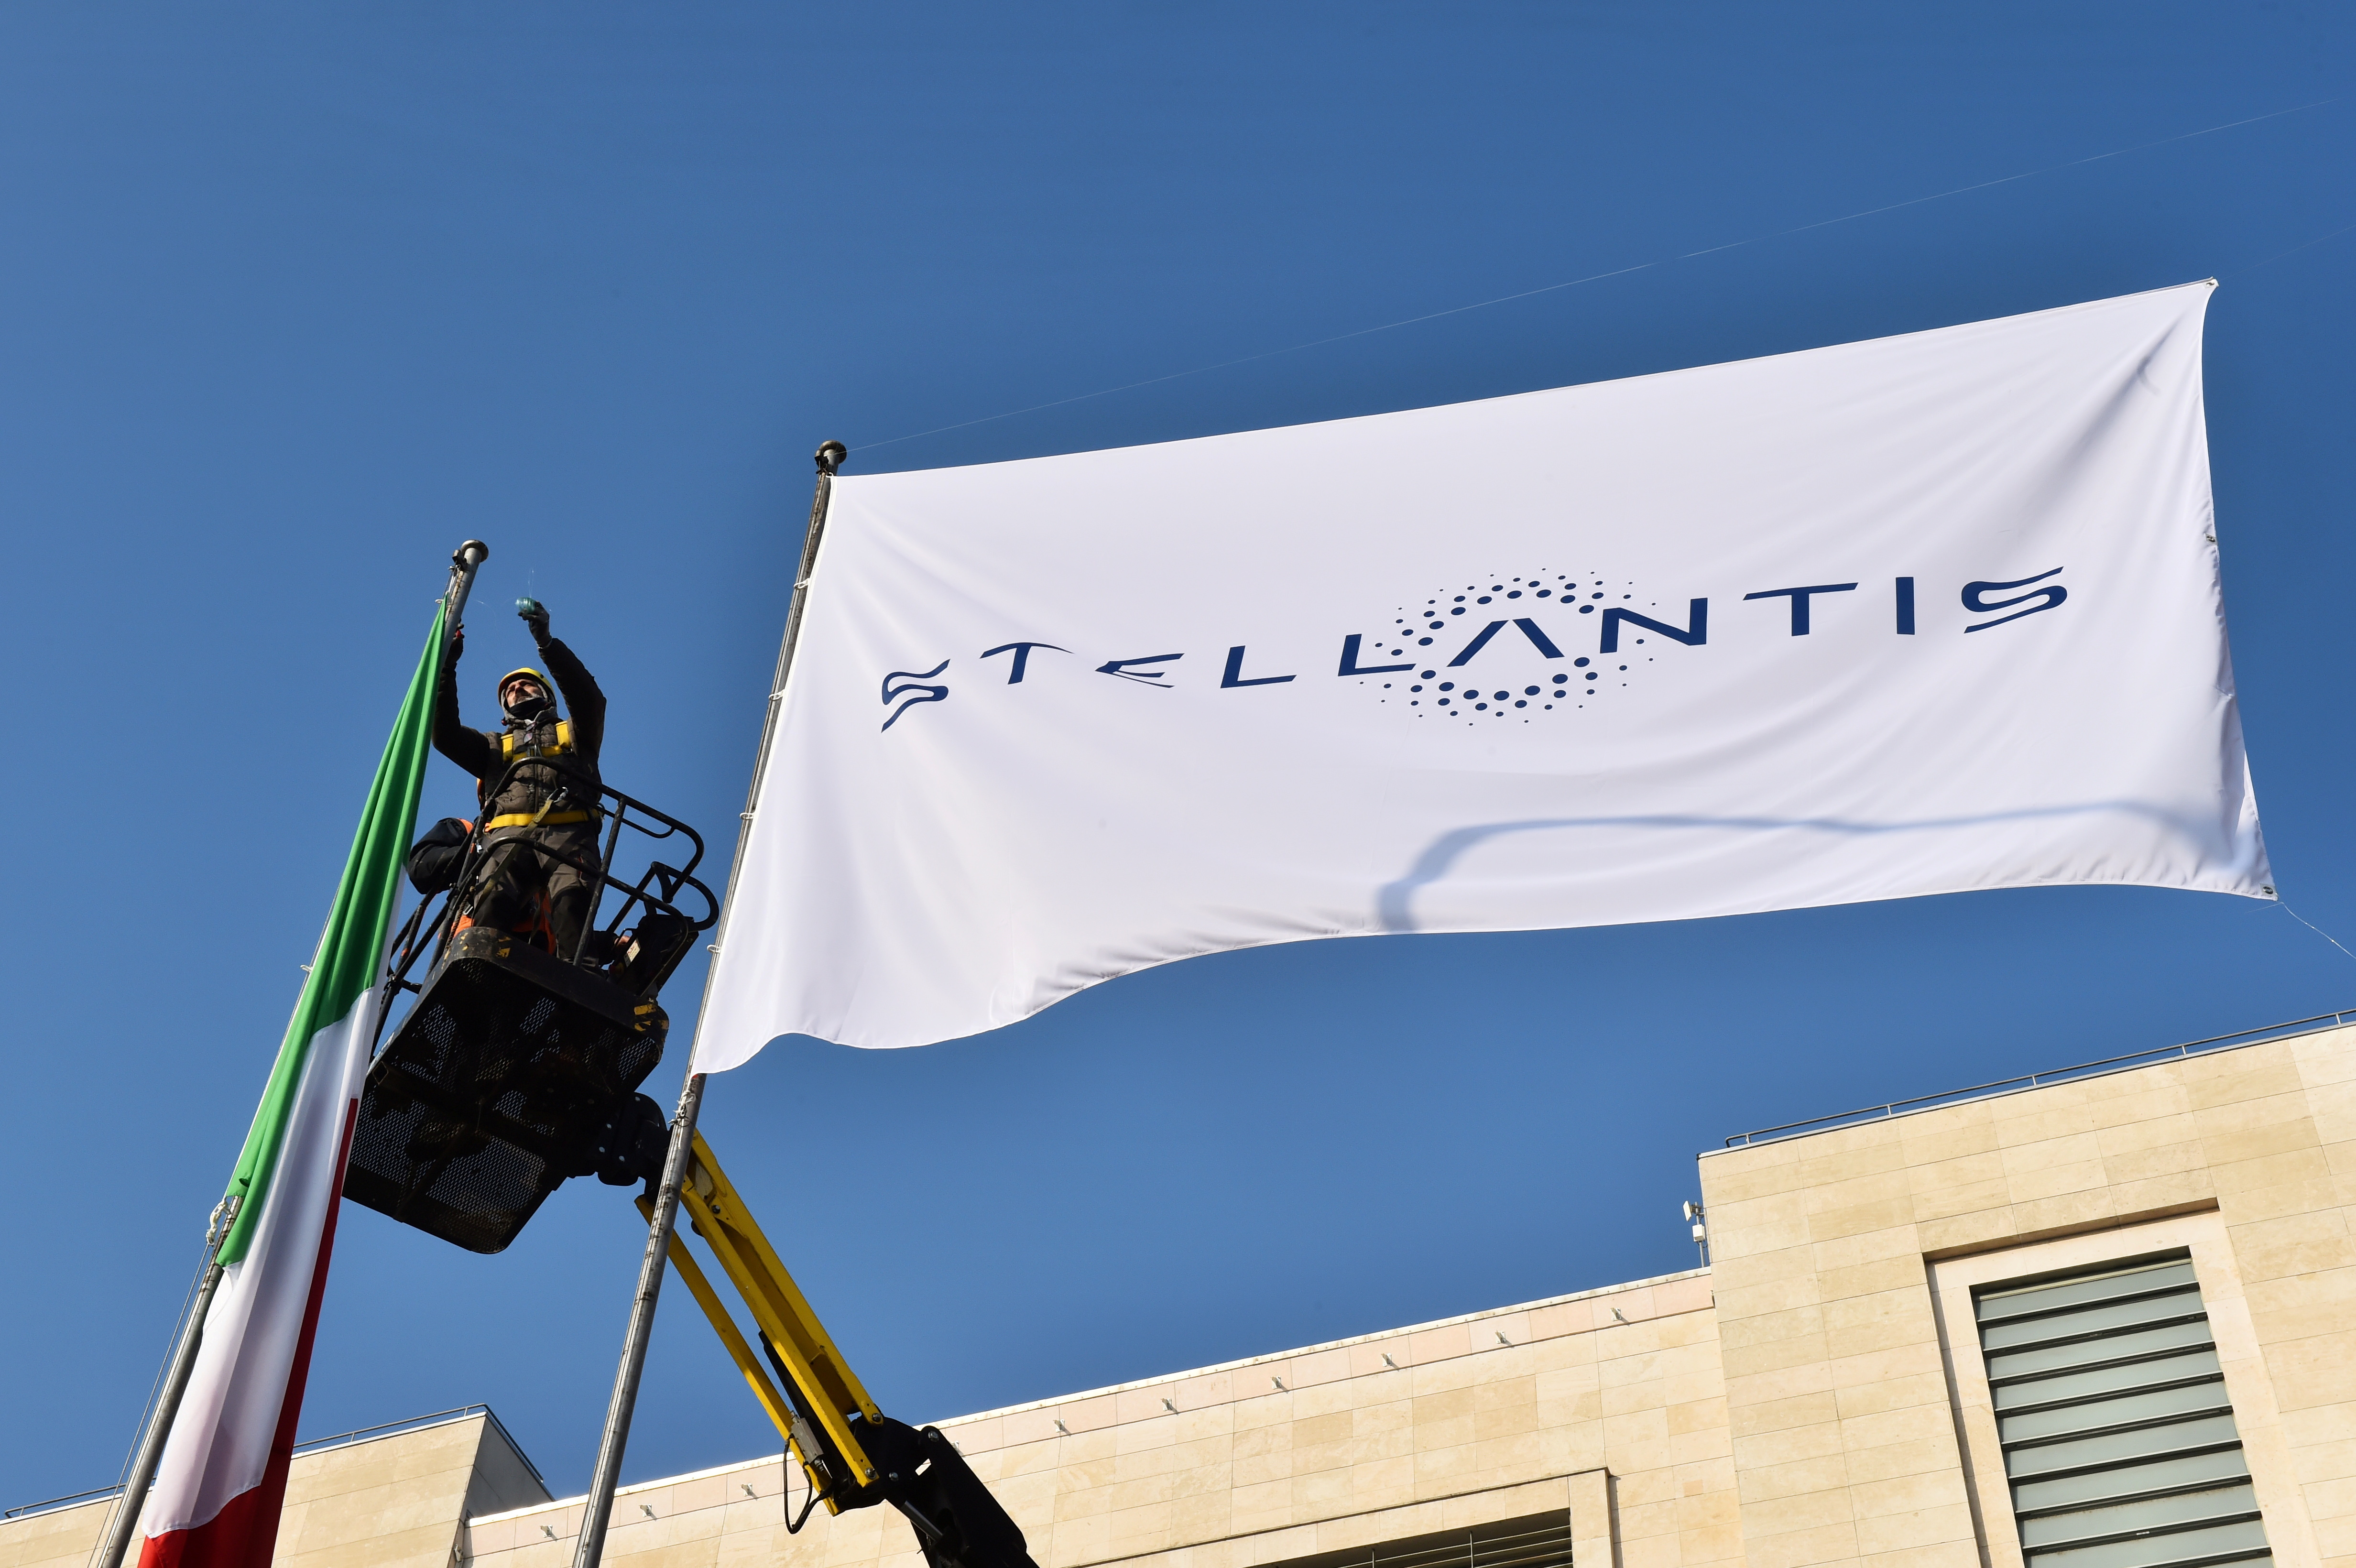 Workers install a flag with the logo of Stellantis, the world's fourth-largest automaker which starts trading in Milan and Paris after Fiat Chrysler and Peugeot maker PSA finalised their merger, at the main entrance of FCA Mirafiori plant in Turin, Italy, January 18, 2021. REUTERS/Massimo Pinca